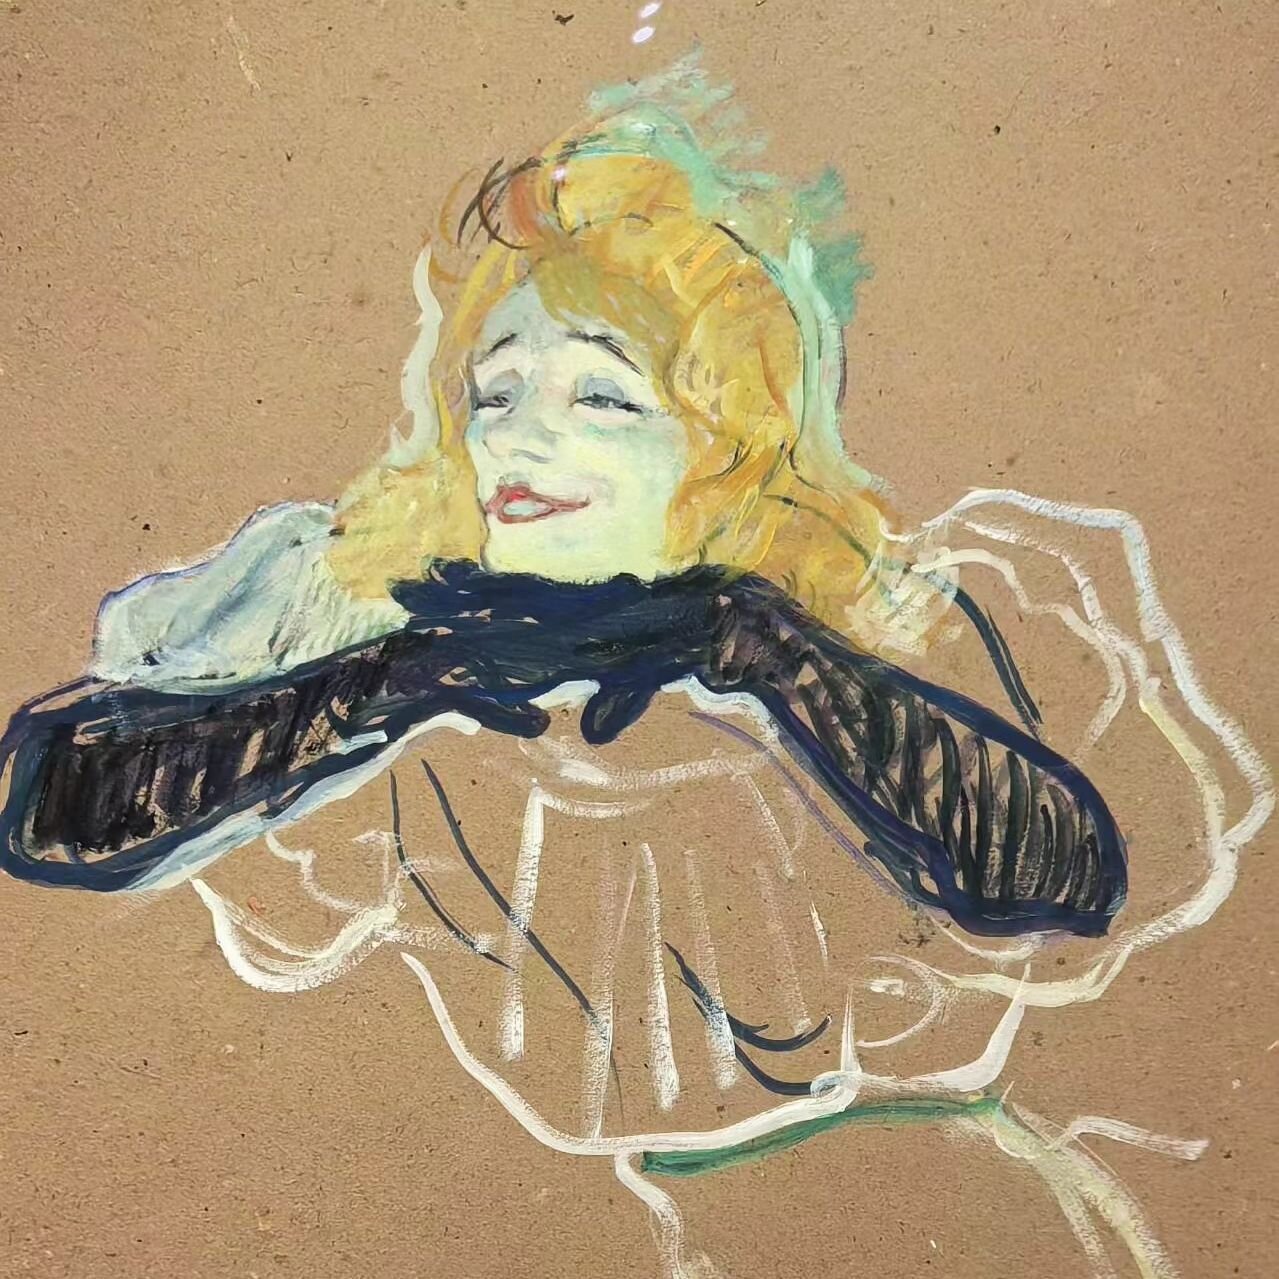 Wonders at Pushkin museum: Portrait of the singer Yvette Gilbert - one of the favorite models of Toulouse-Lautrec - was created by order of the Paris satirical magazine &quot;Rire&quot;, for which the artist regularly made illustrations. Despite some